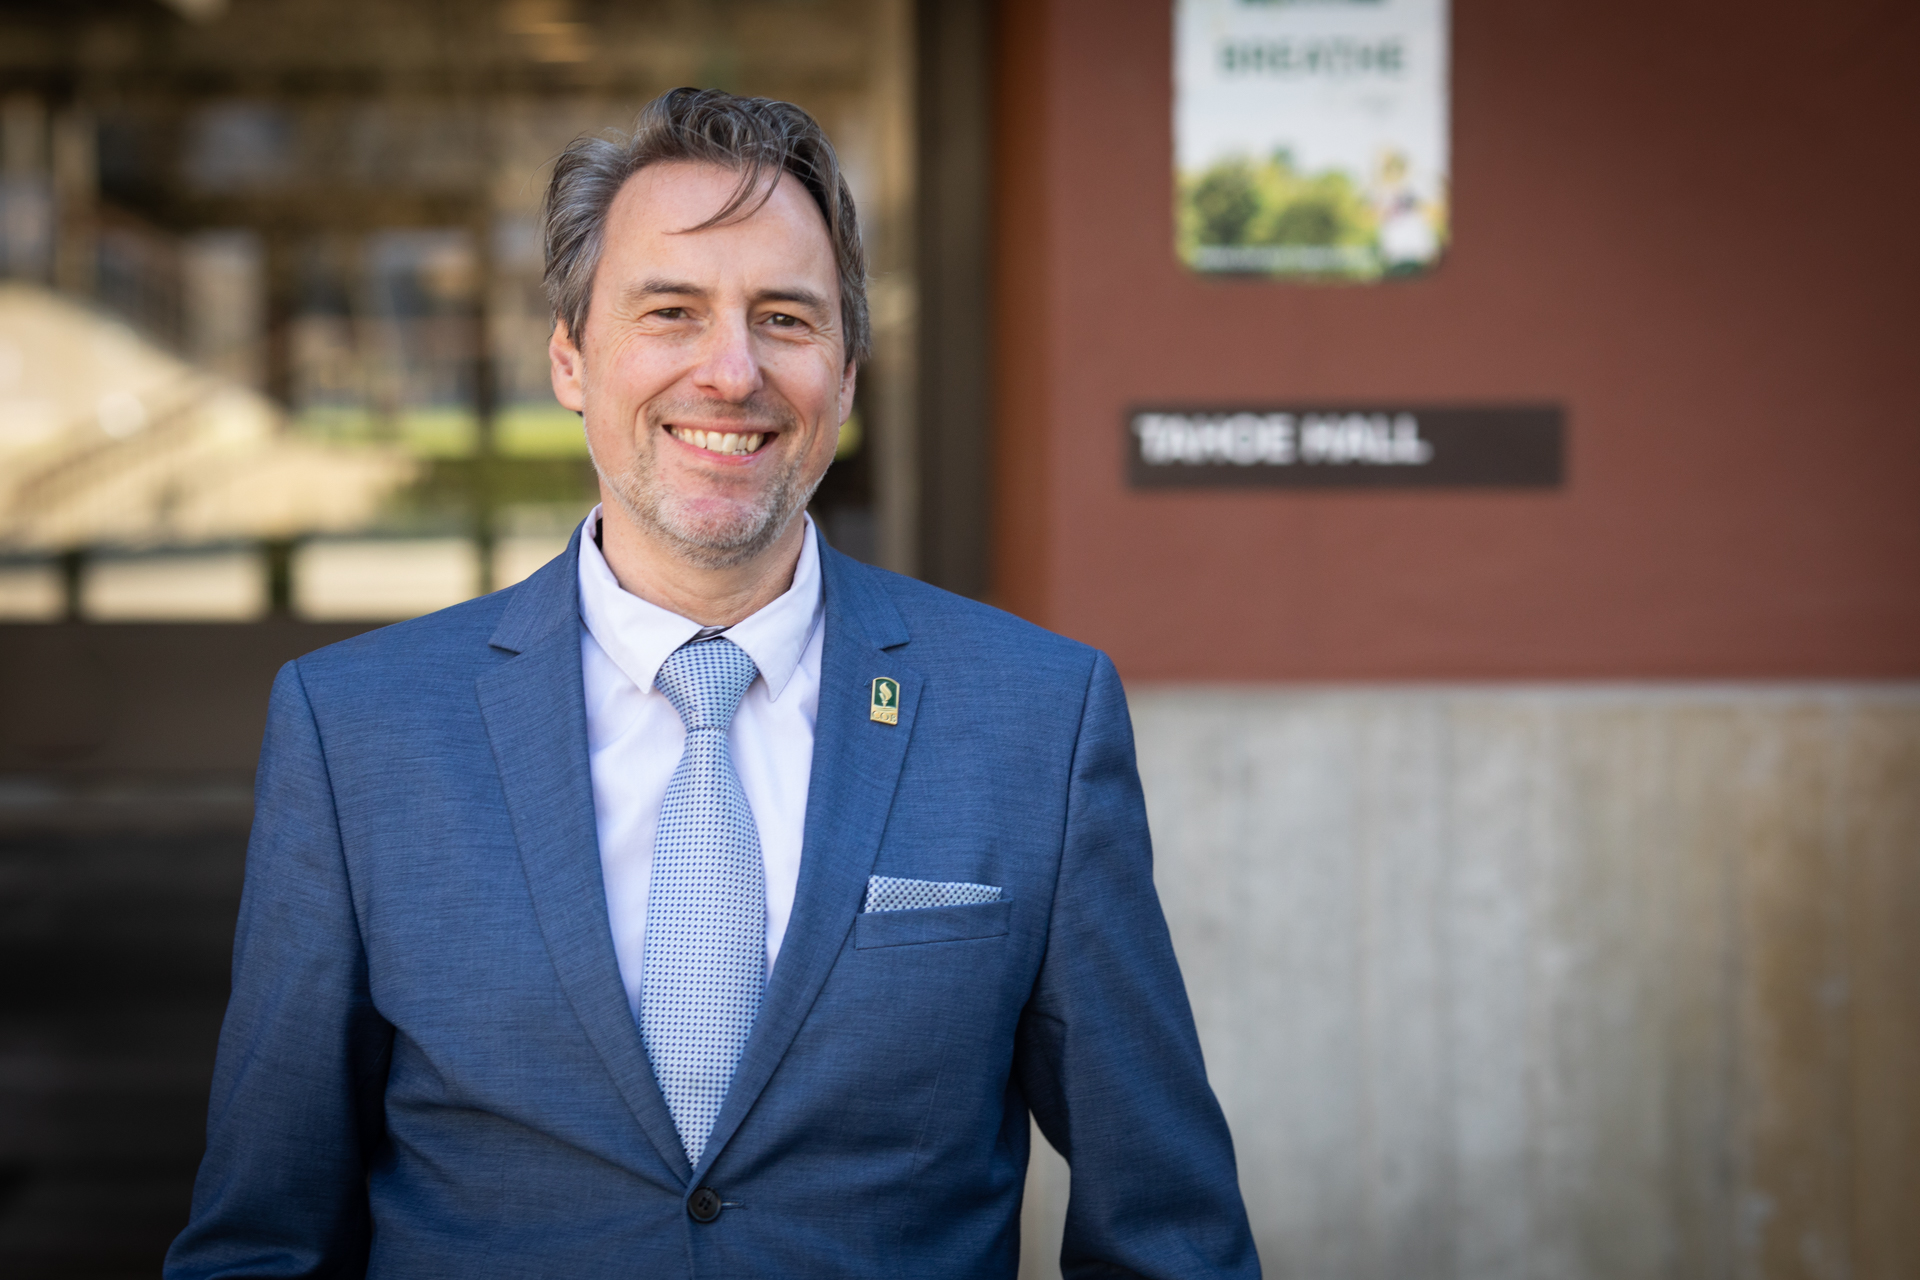 Sac State's new College of Business dean wearing a suit and tie poses at Tahoe Hall on campus while smiling. 